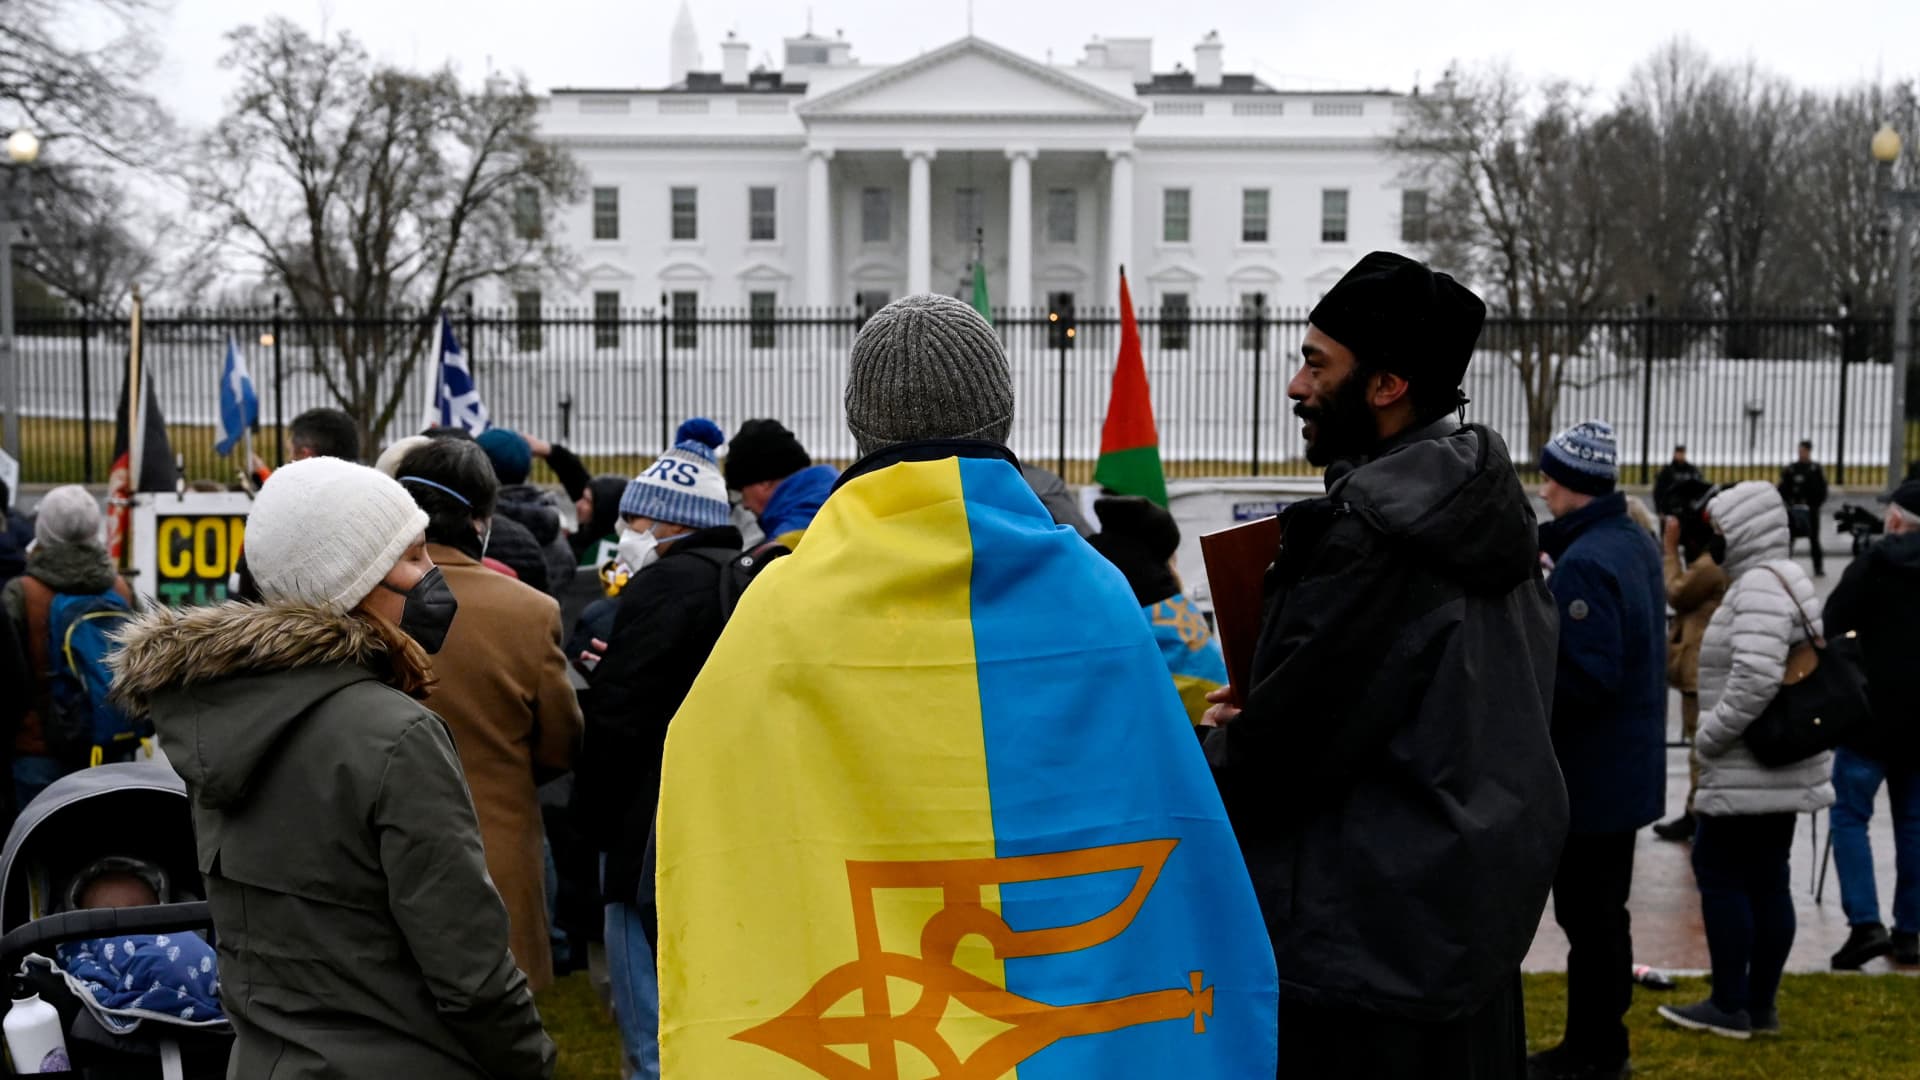 Demonstrators protest in support of Ukraine in front of the White House, in Washington, DC, on February 24, 2022.